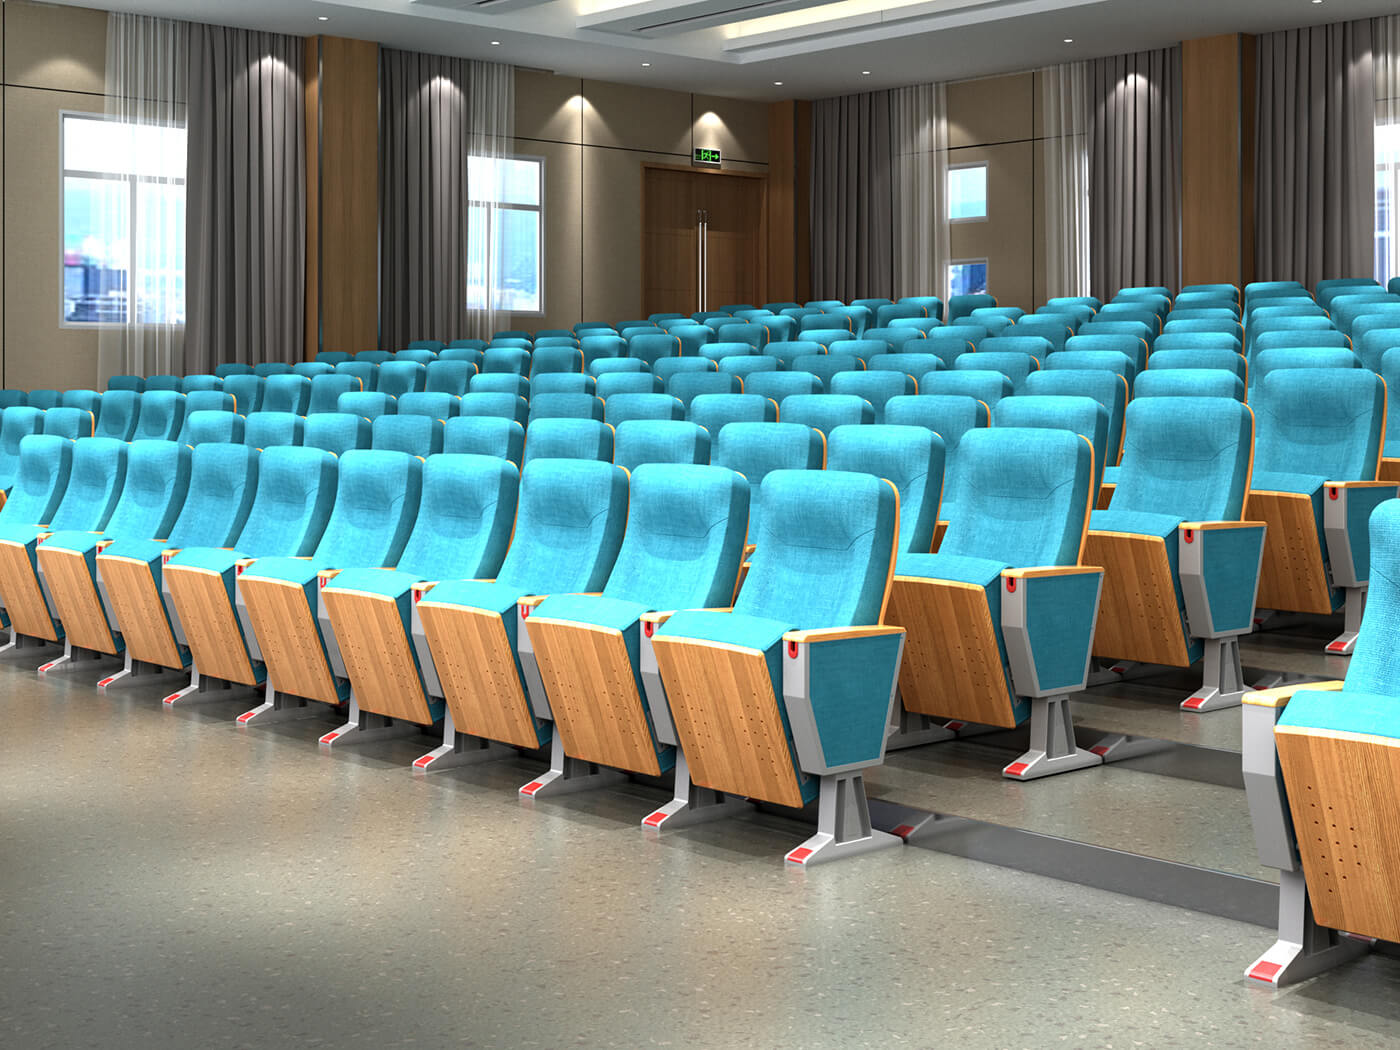 Enhance-the-Comfort-and-Style-of-Your-Auditorium-with-Custom-Seating-Solutions-from-Leading-Manufacturers11